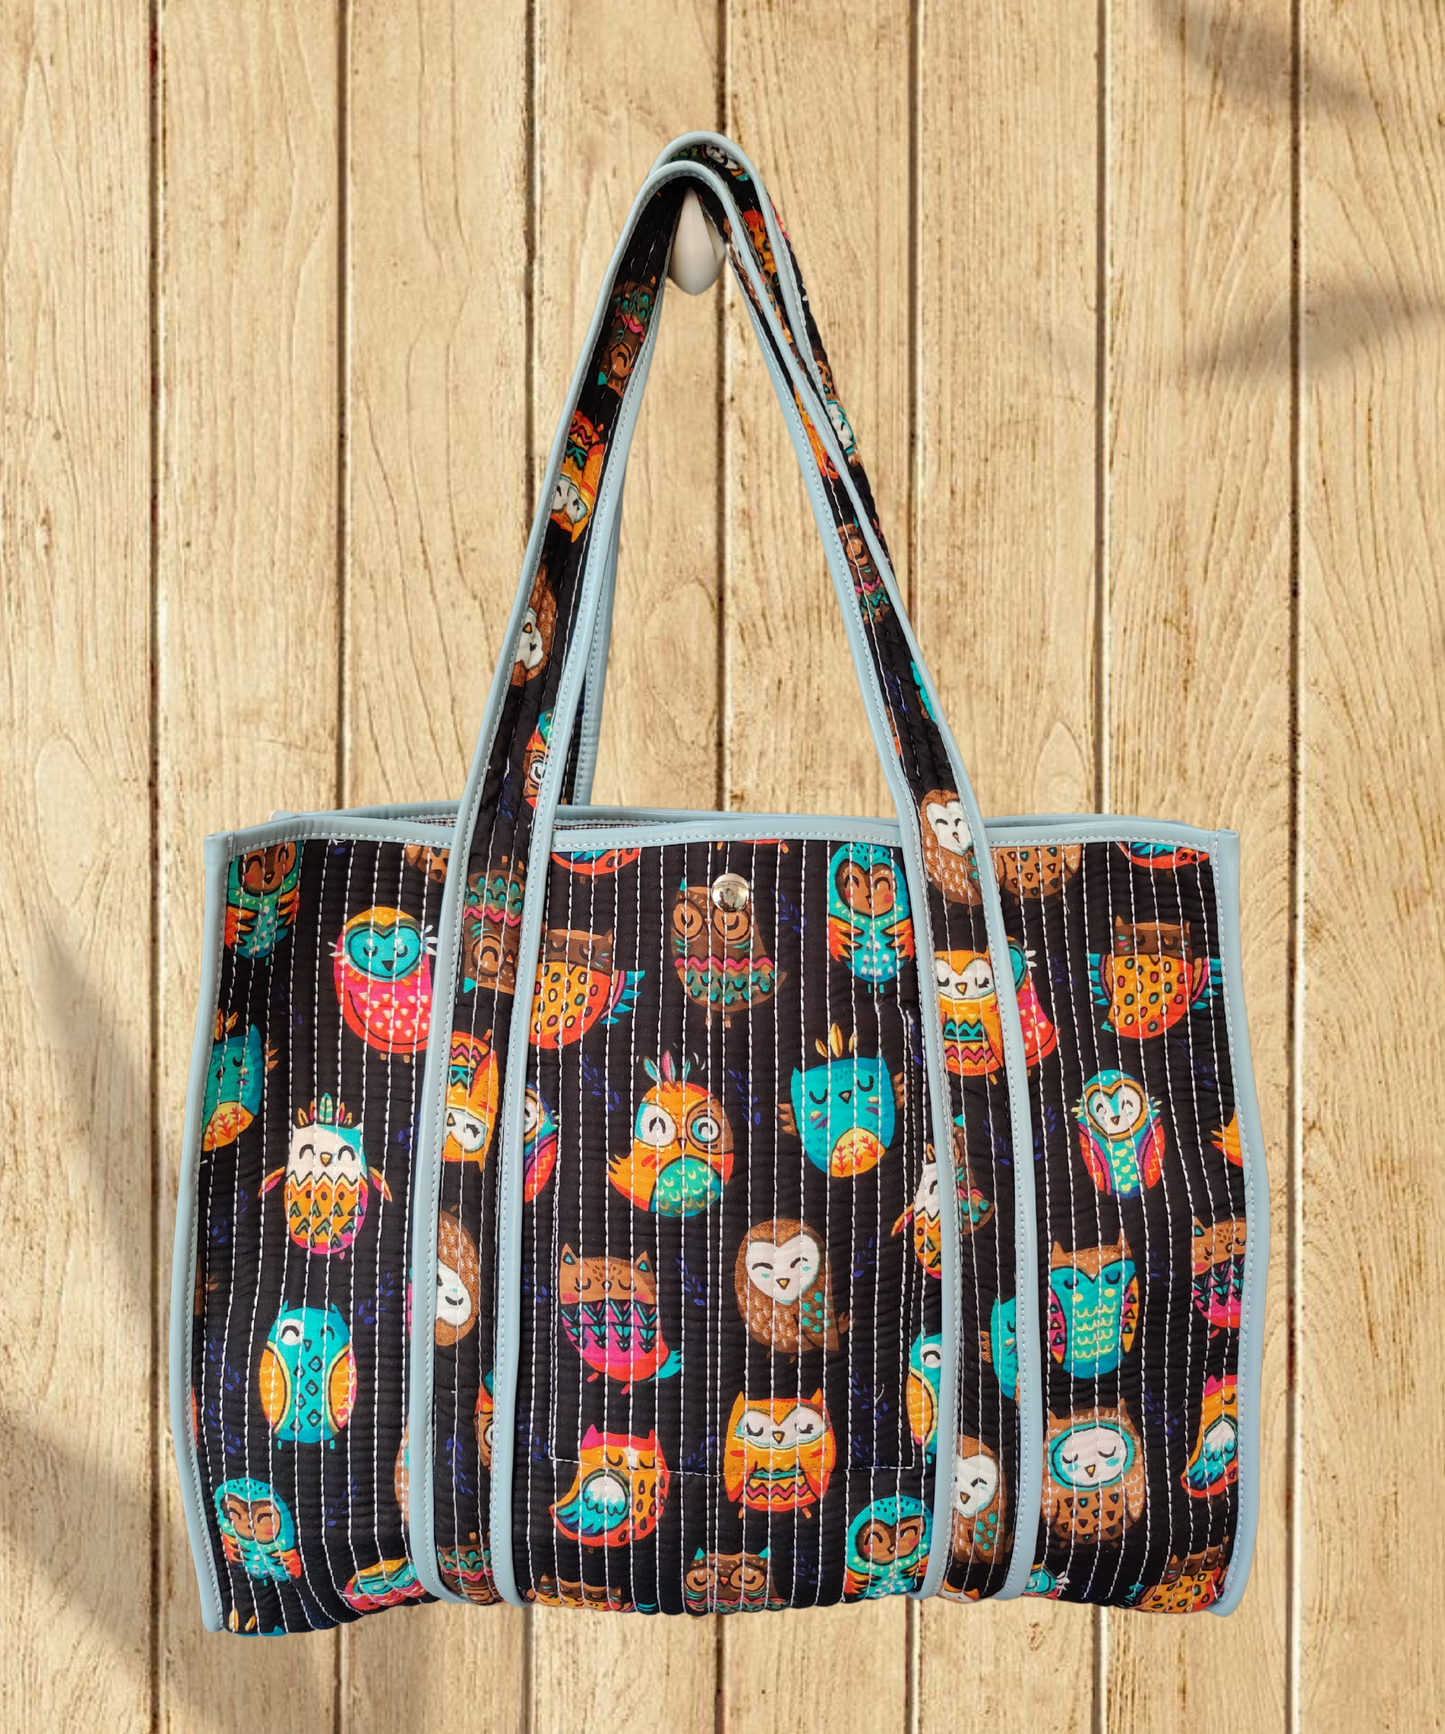 Black Owls Cotton Quilted Tote Bag